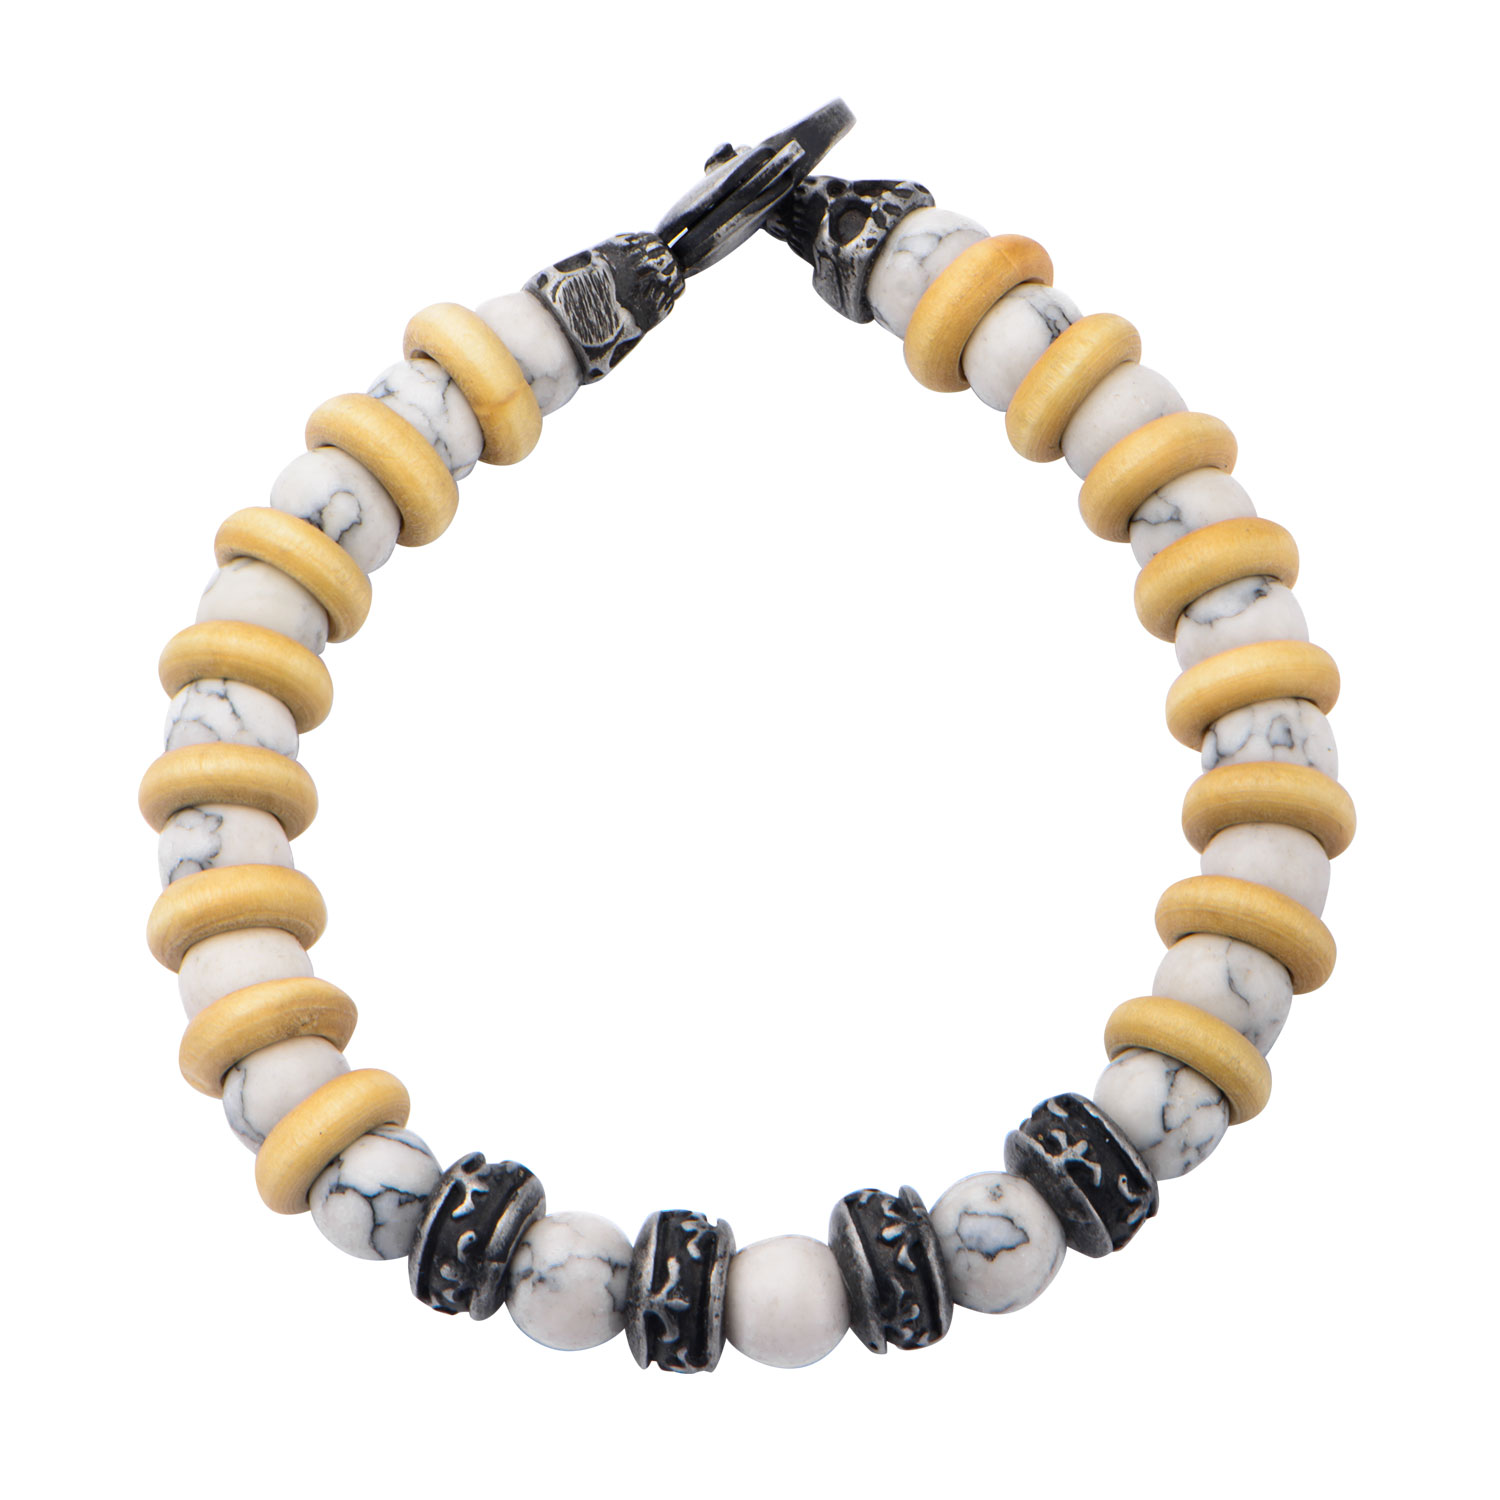 8mm White Howlite Beads with Taupe Wood Separators Bracelet Image 4 Lewis Jewelers, Inc. Ansonia, CT